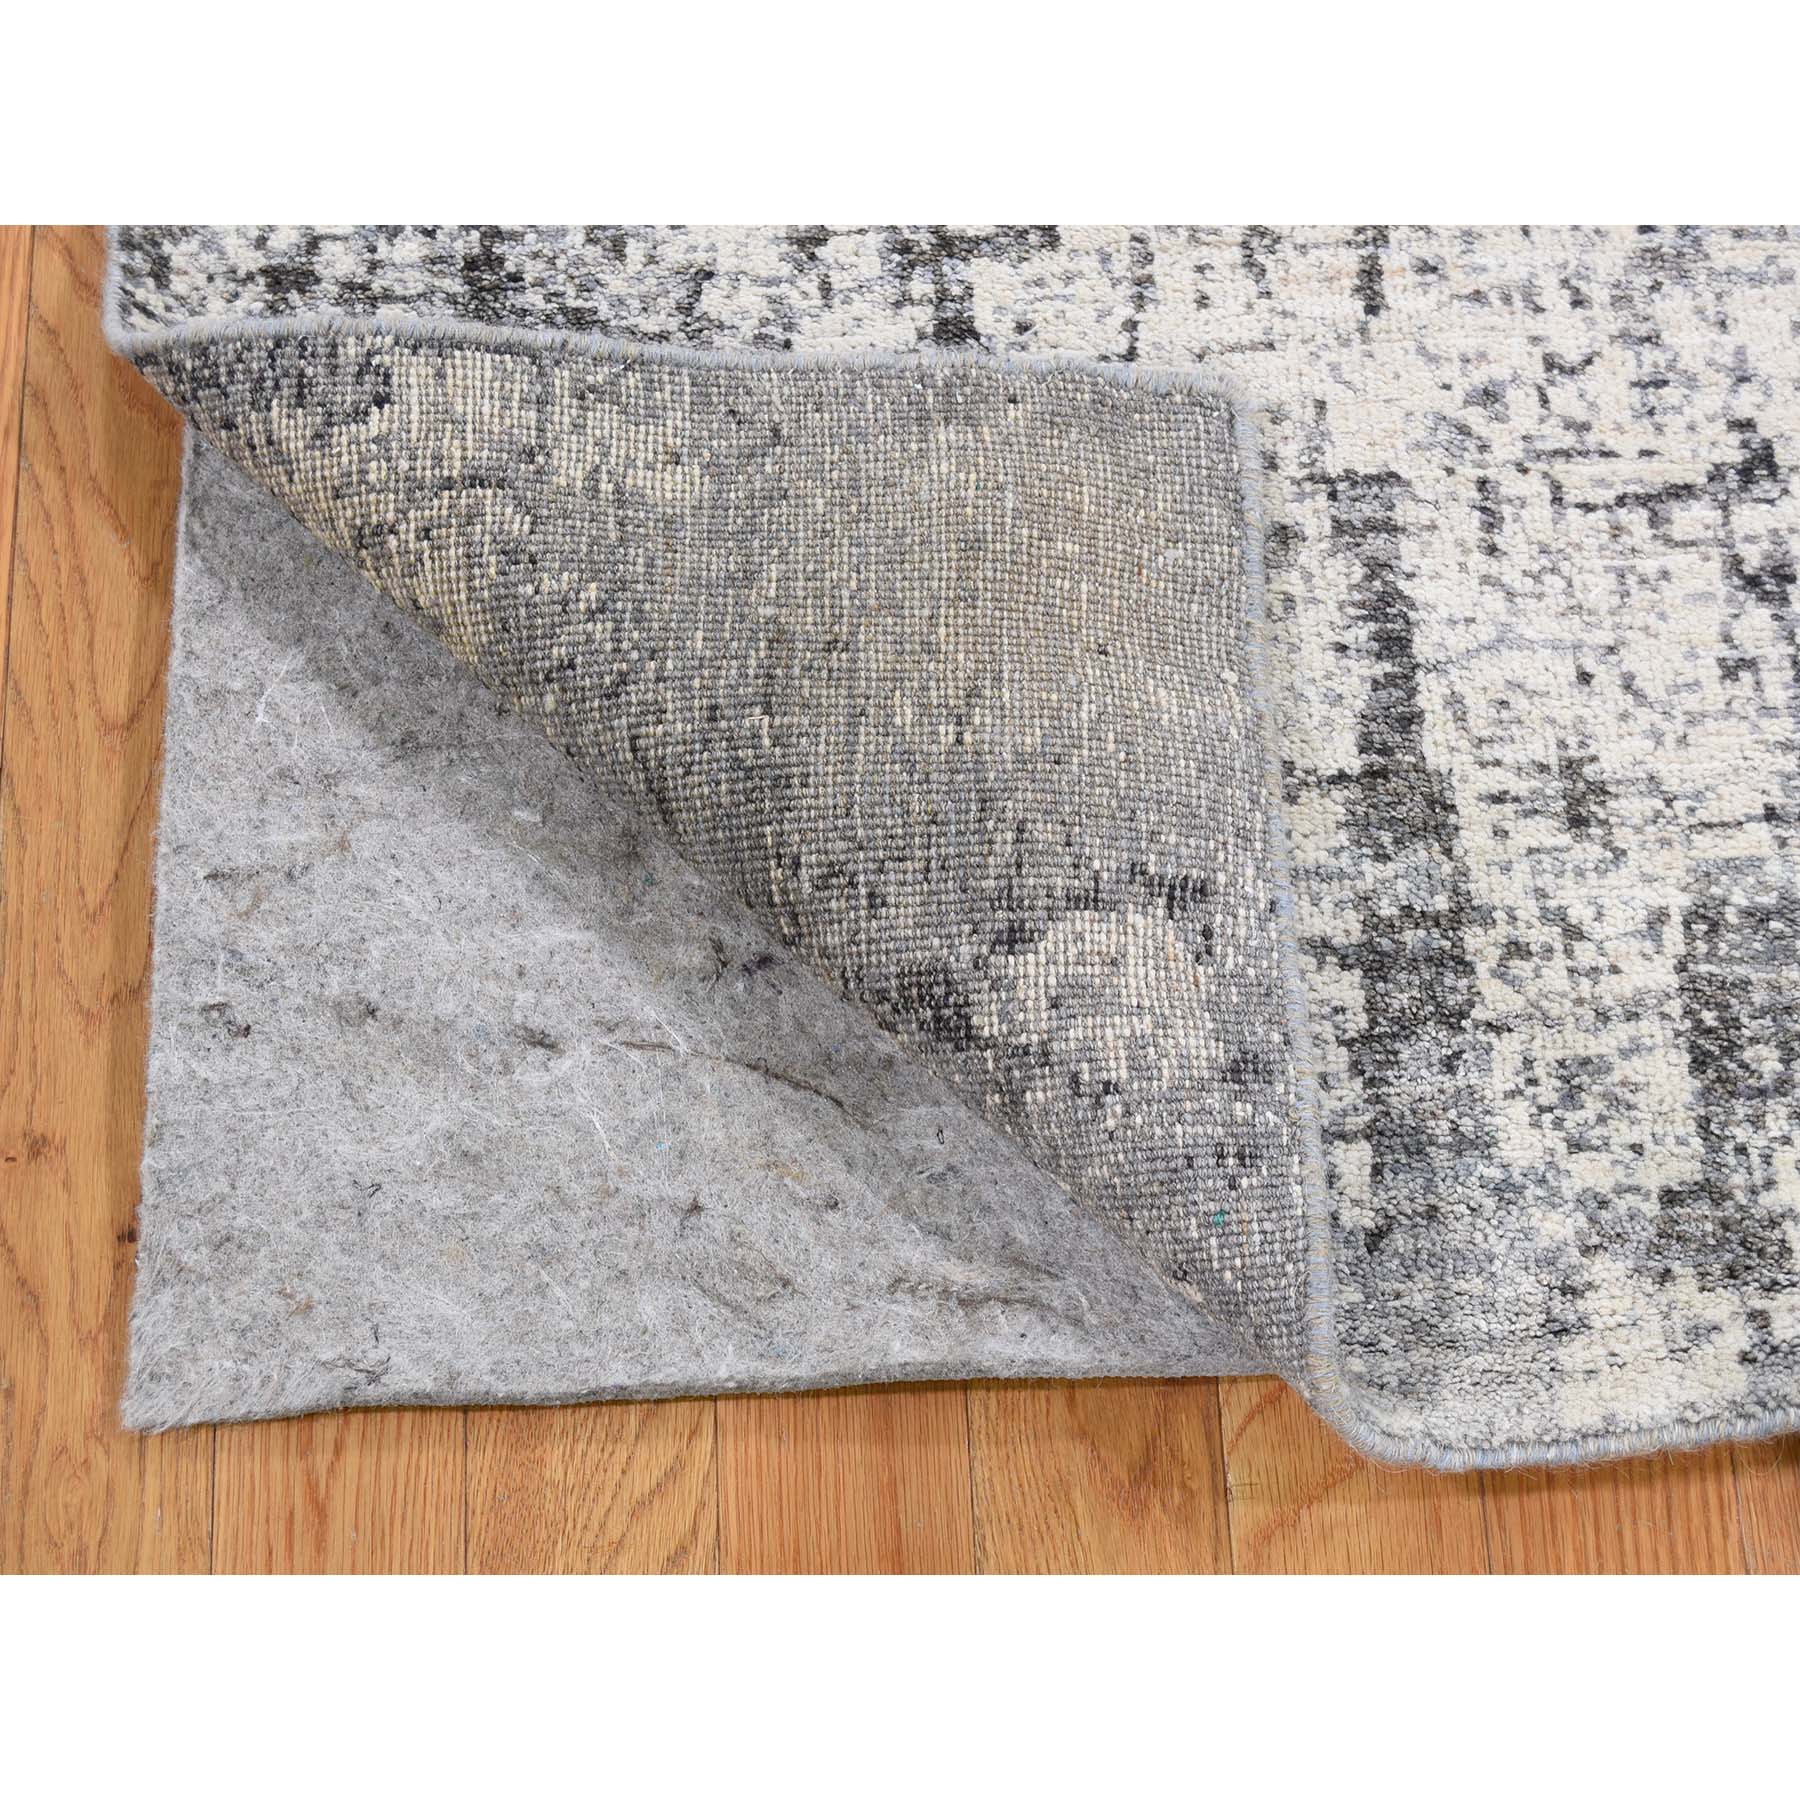 4-x6-2  Abstract Design Hand-Knotted Hi-Lo Pile THE TREE BARK Soft Wool Oriental Rug 